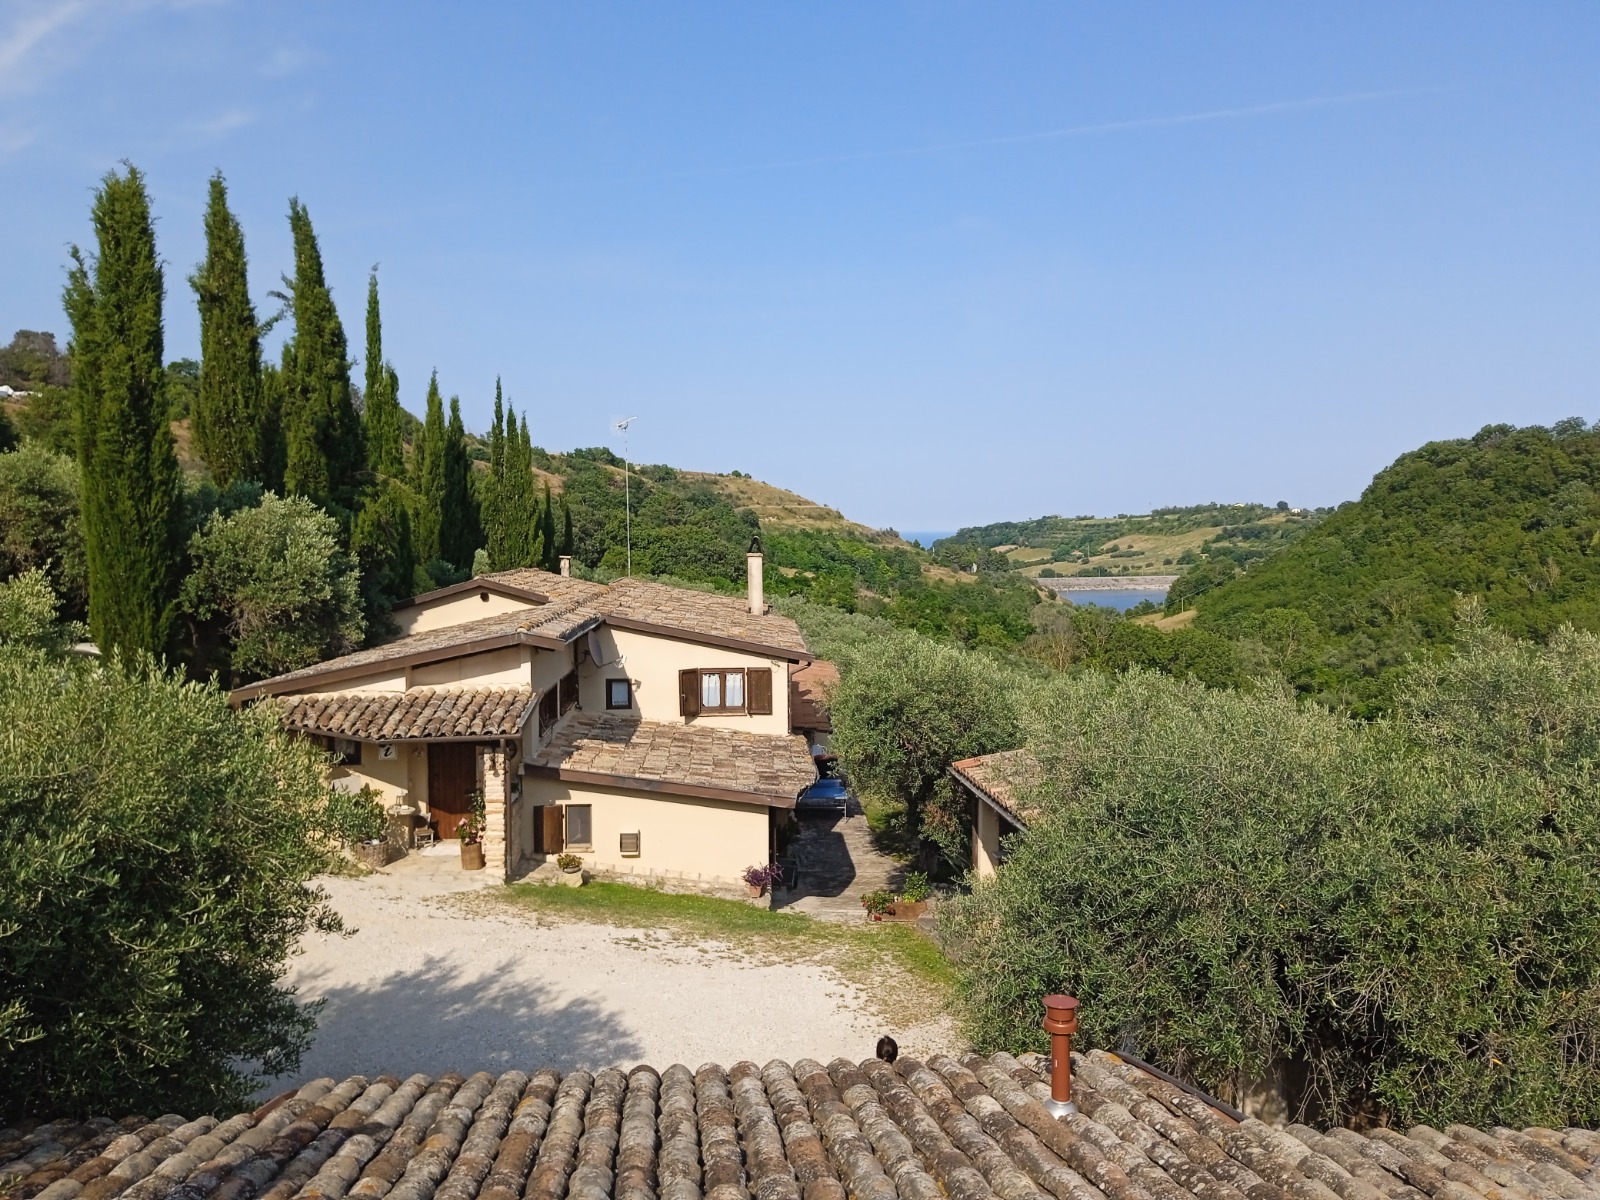 Agriturismo for sale in Le Marche